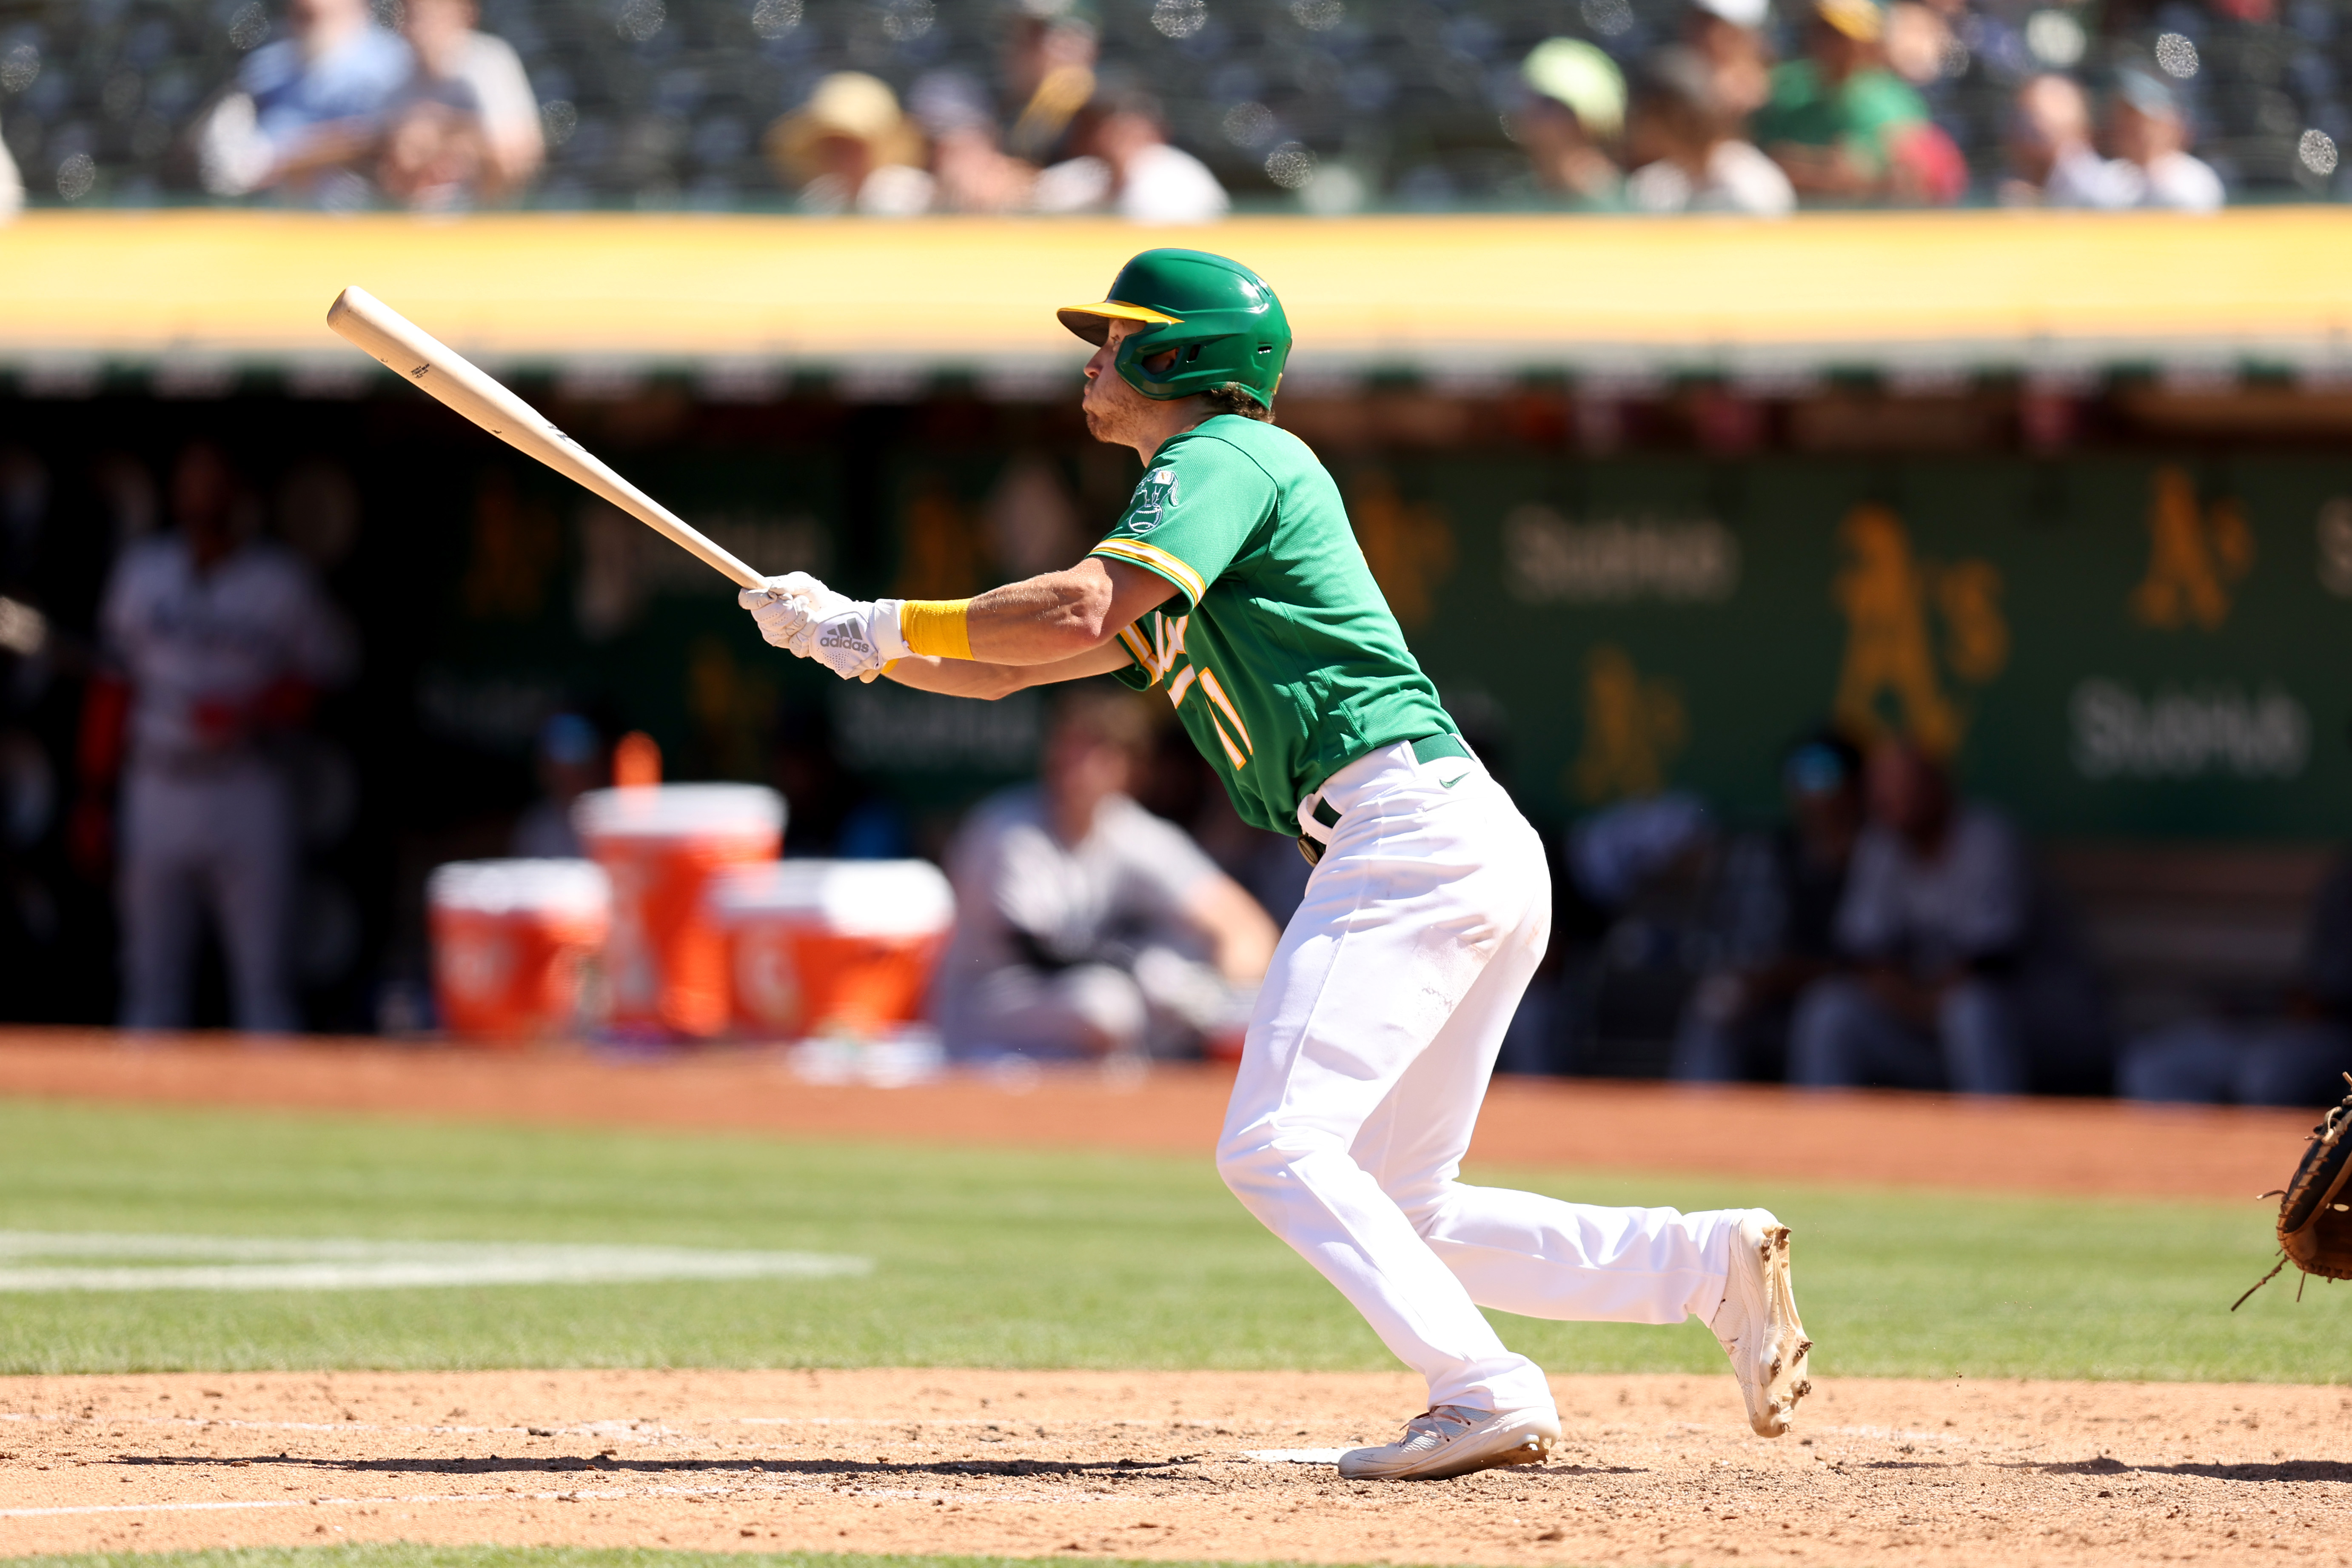 The Oakland Athletics' Starling Marte takes a lead off second base